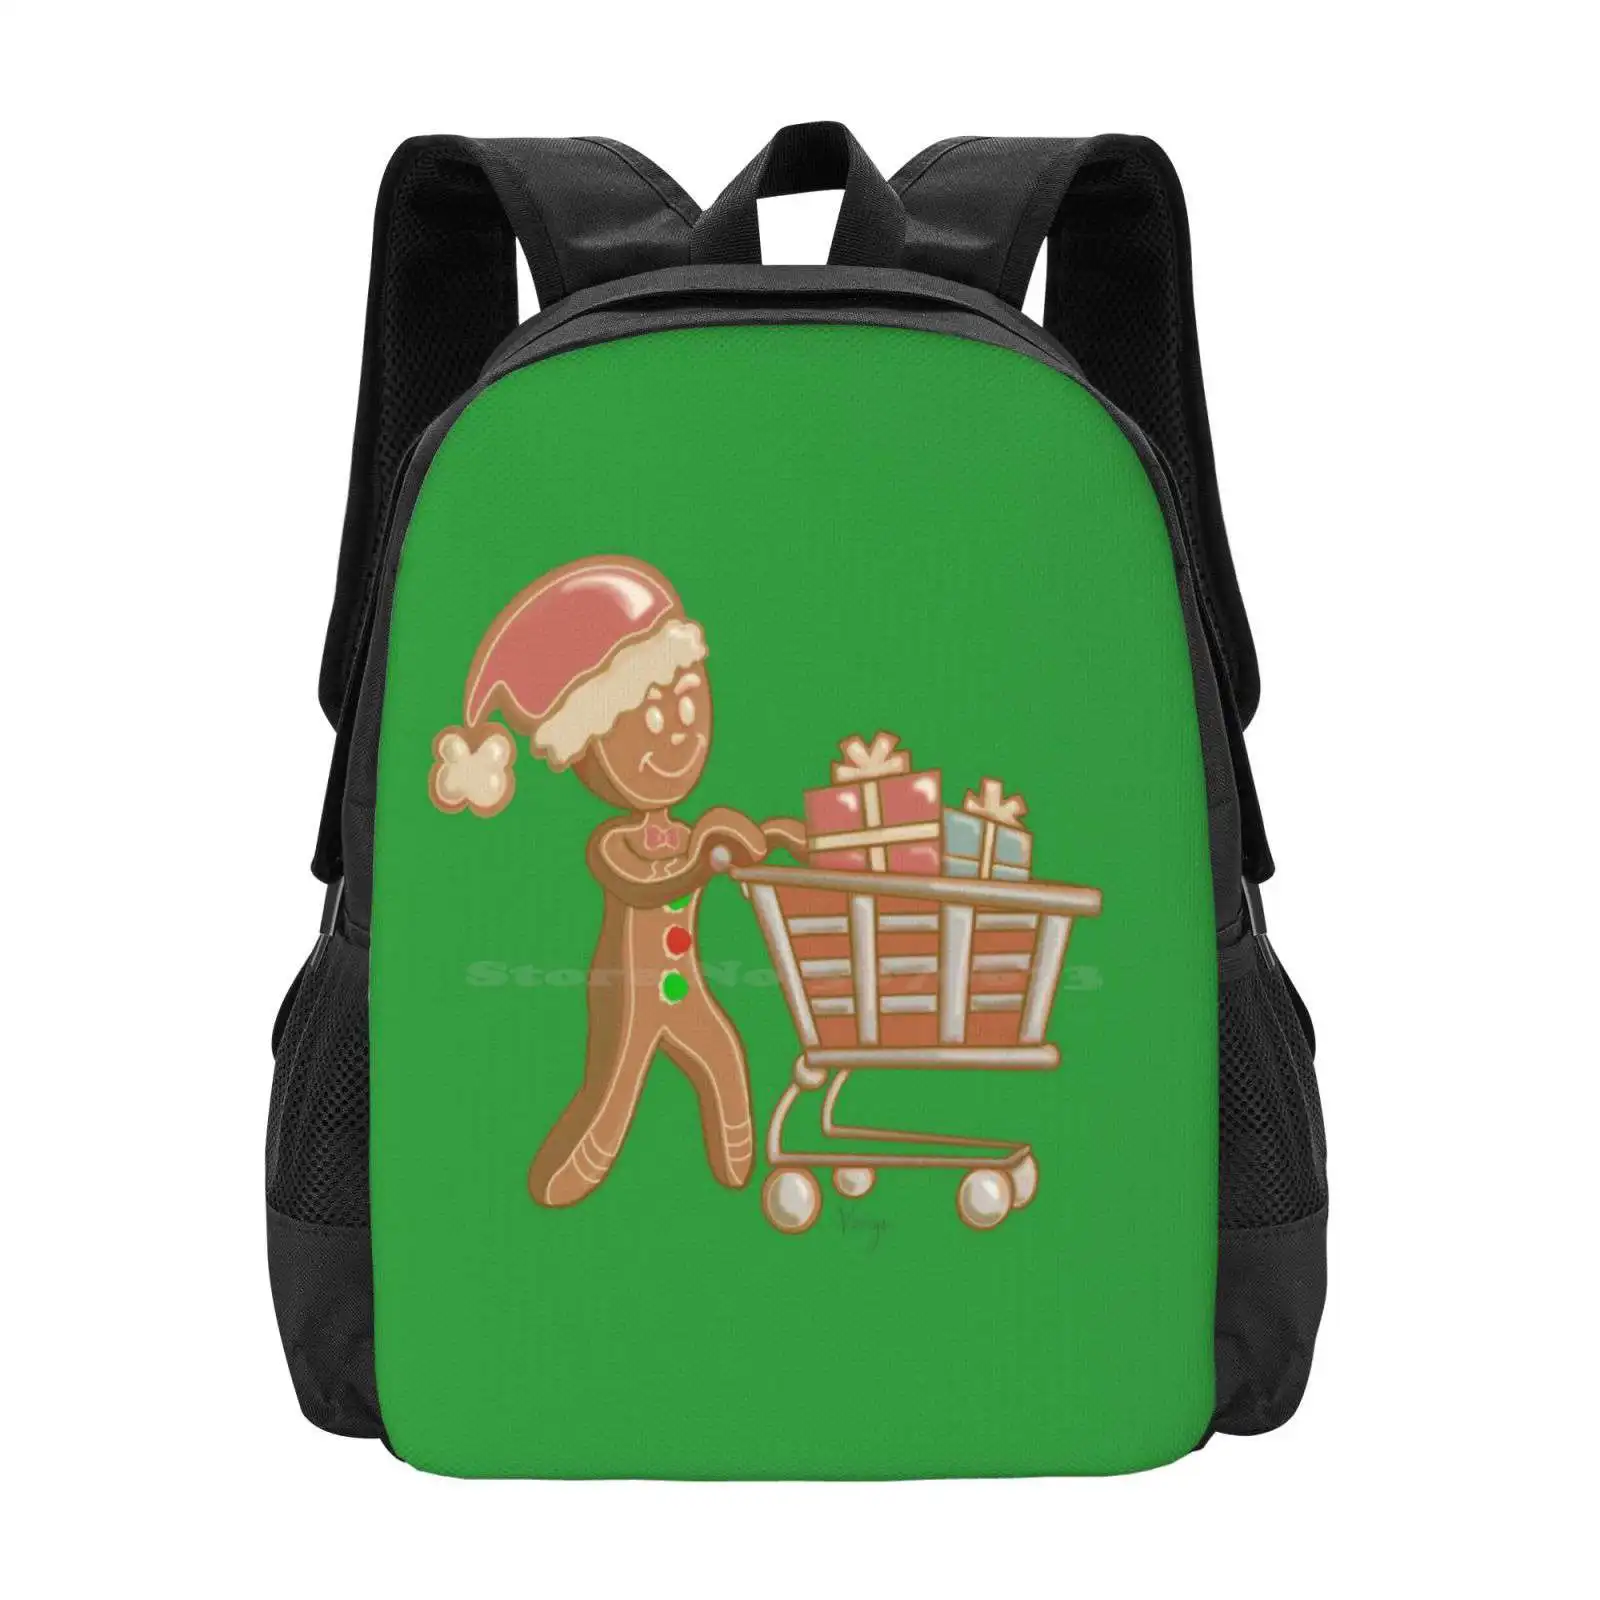 

Gingerbread Savvy Shopper Backpack For Student School Laptop Travel Bag Xmas Gingerbread Cookie Joy Happy Christmas Merry